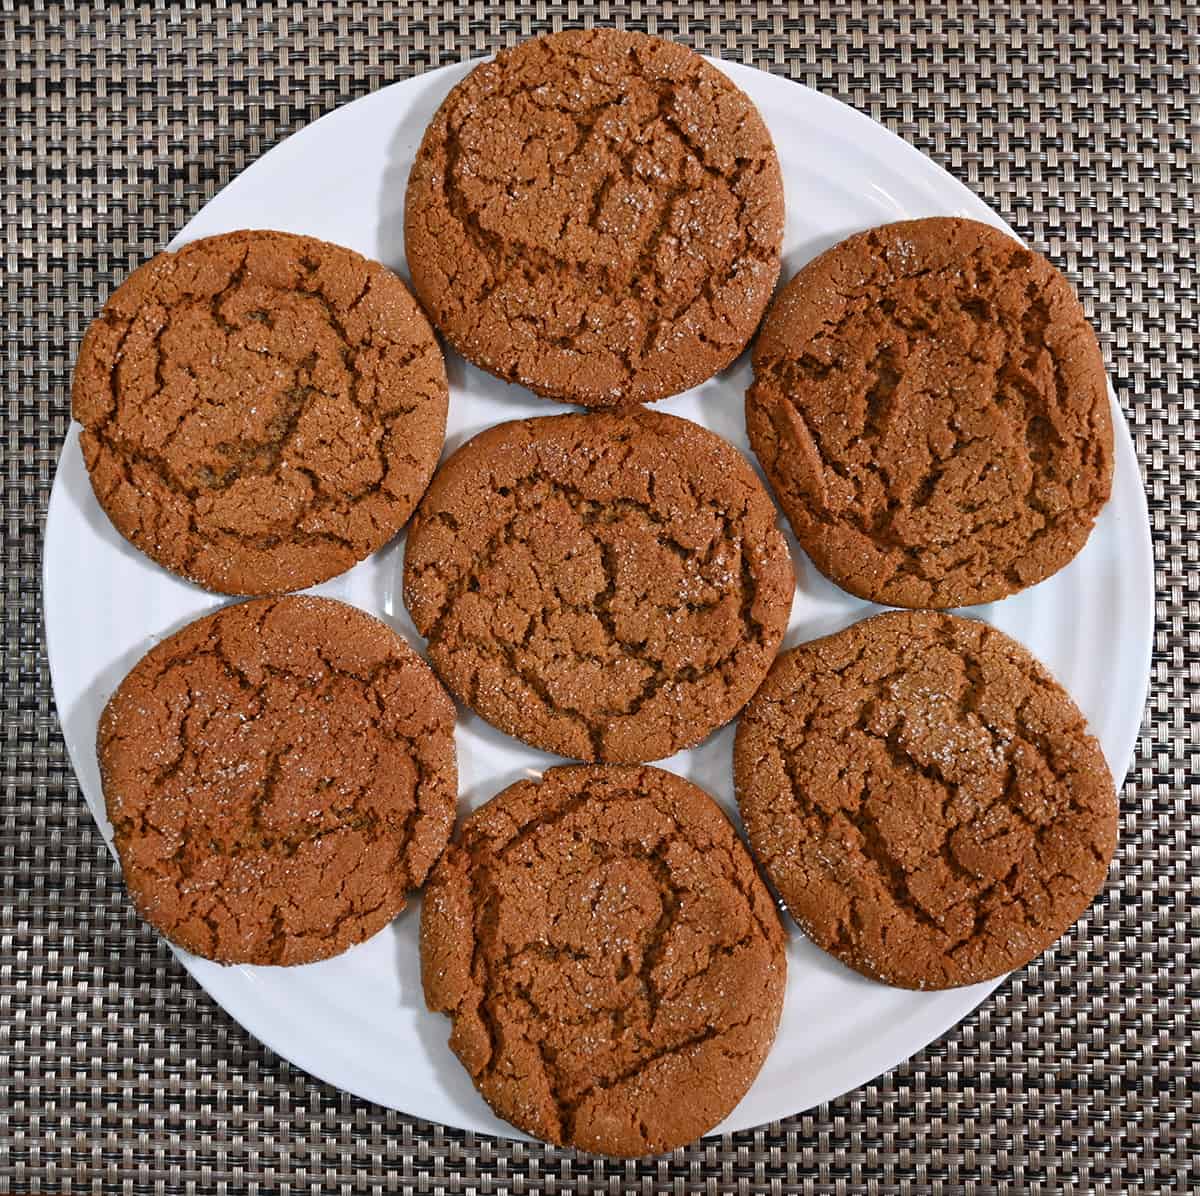 Top down image of a plate of ginger cookies sitting on a table.